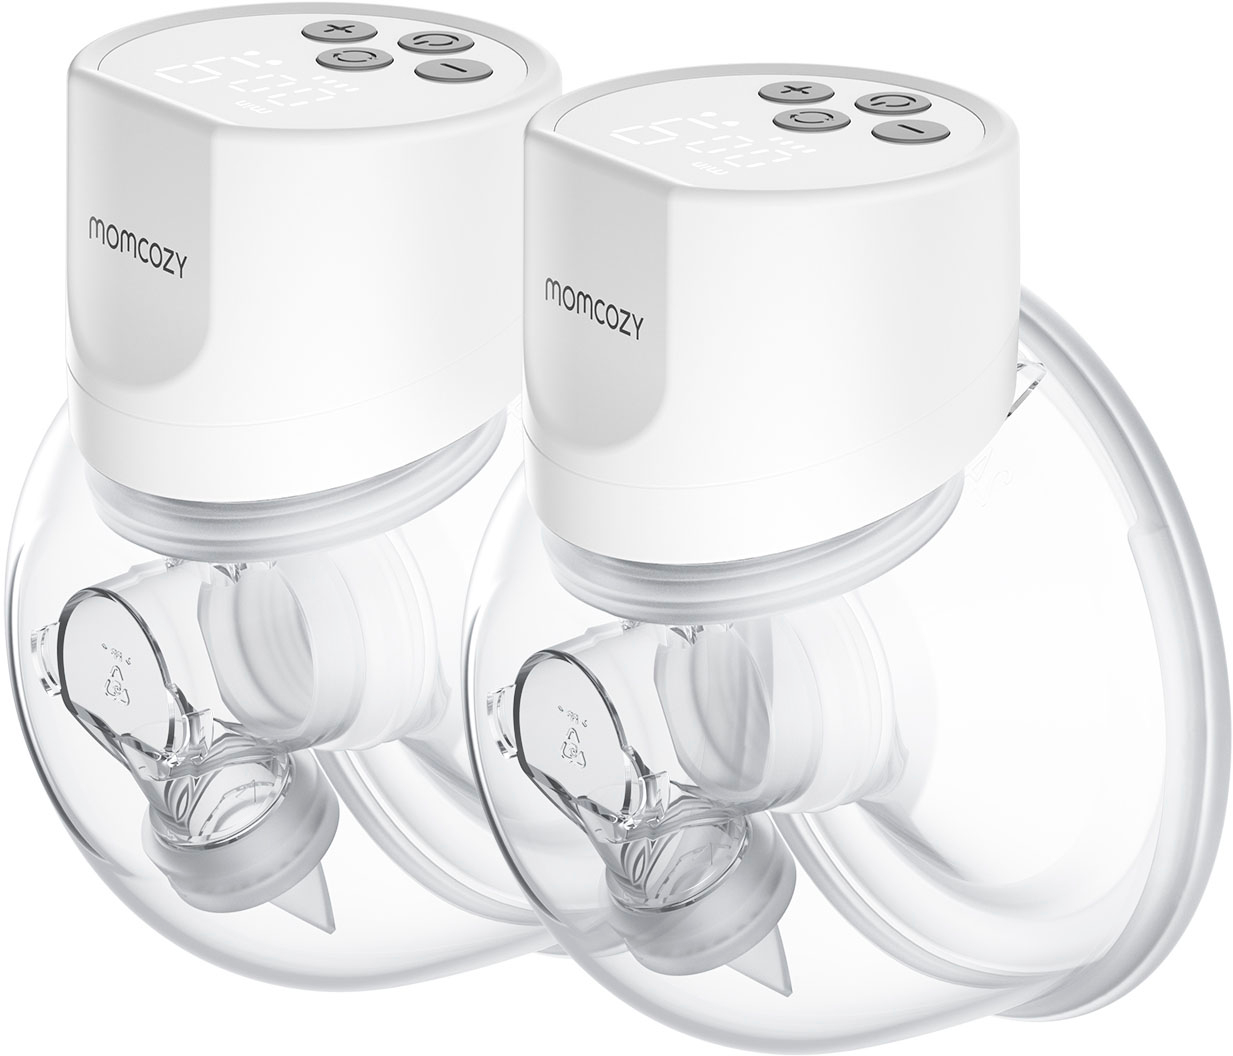 Momcozy S9 Double Wearable Electric Breast Pumps with 24mm Flange